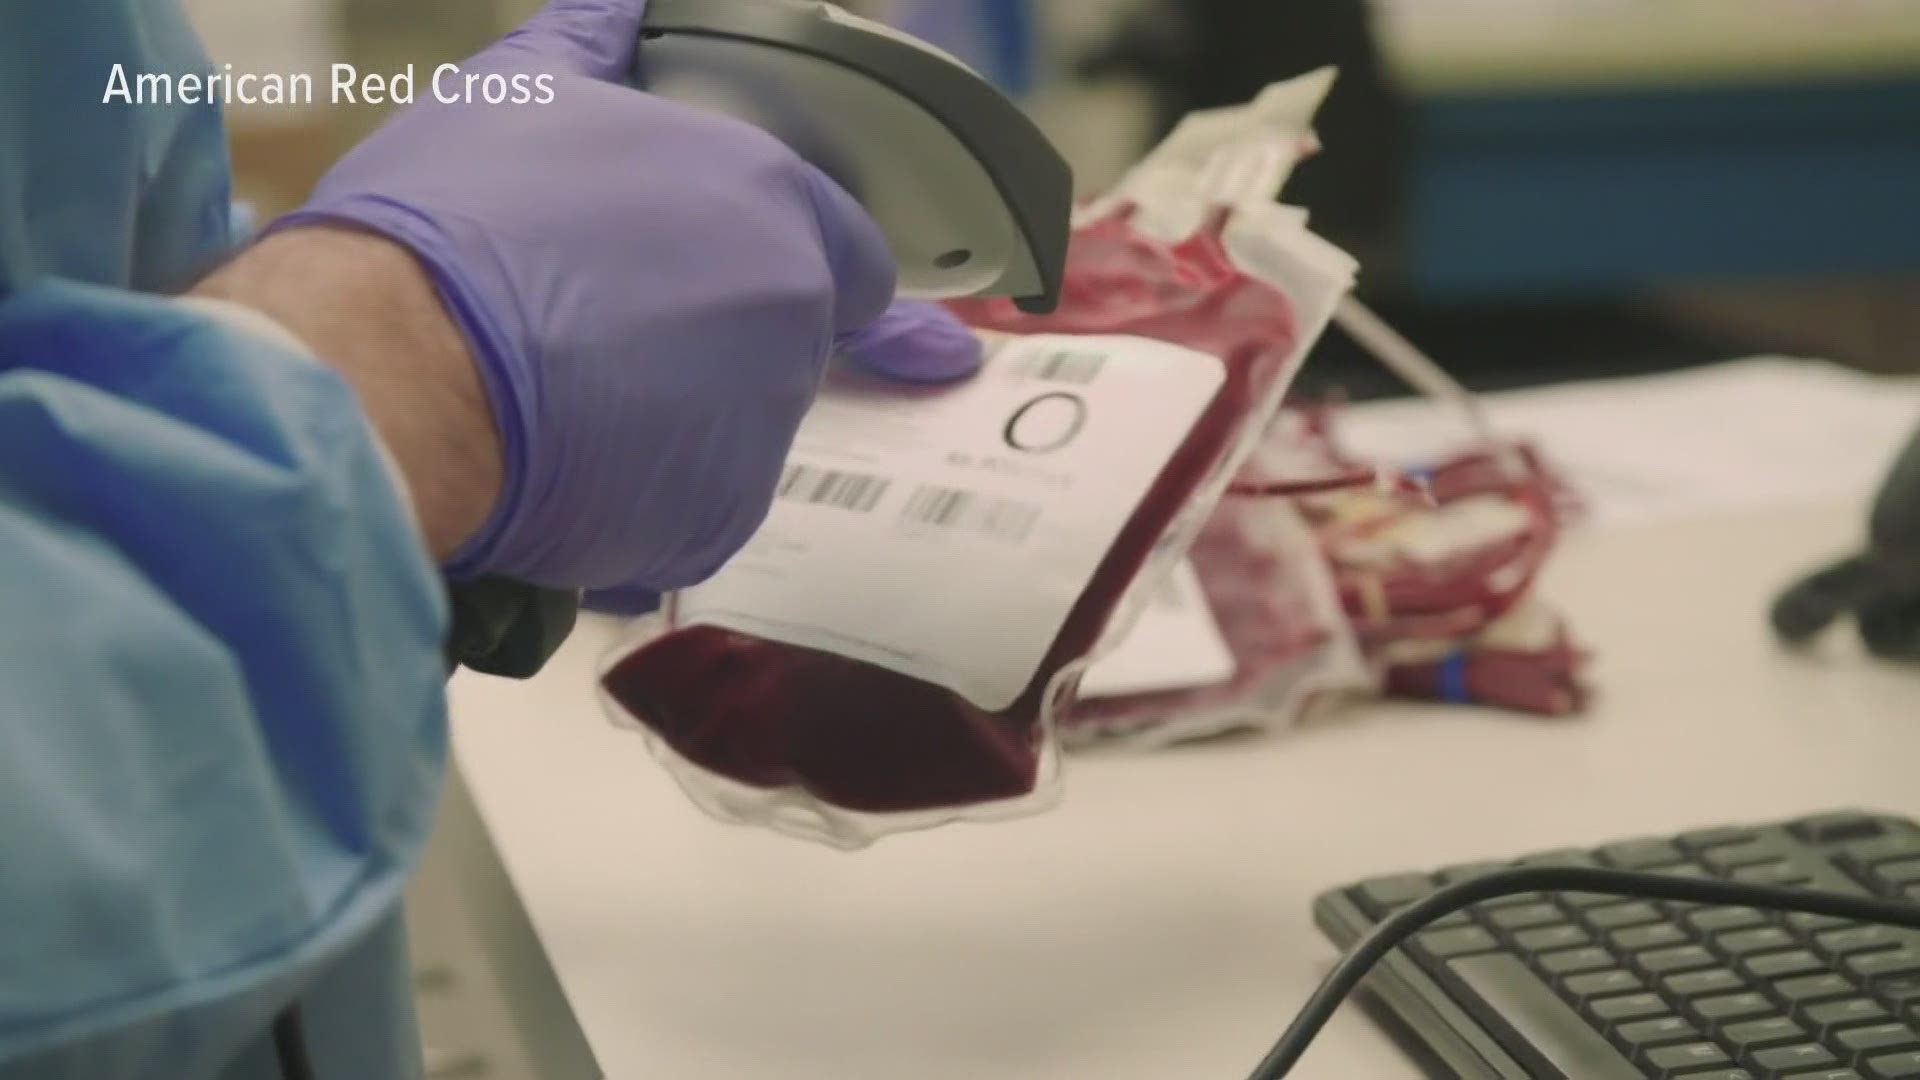 The proposed legislation would provide tax credits for individuals and businesses who participate in blood donation.